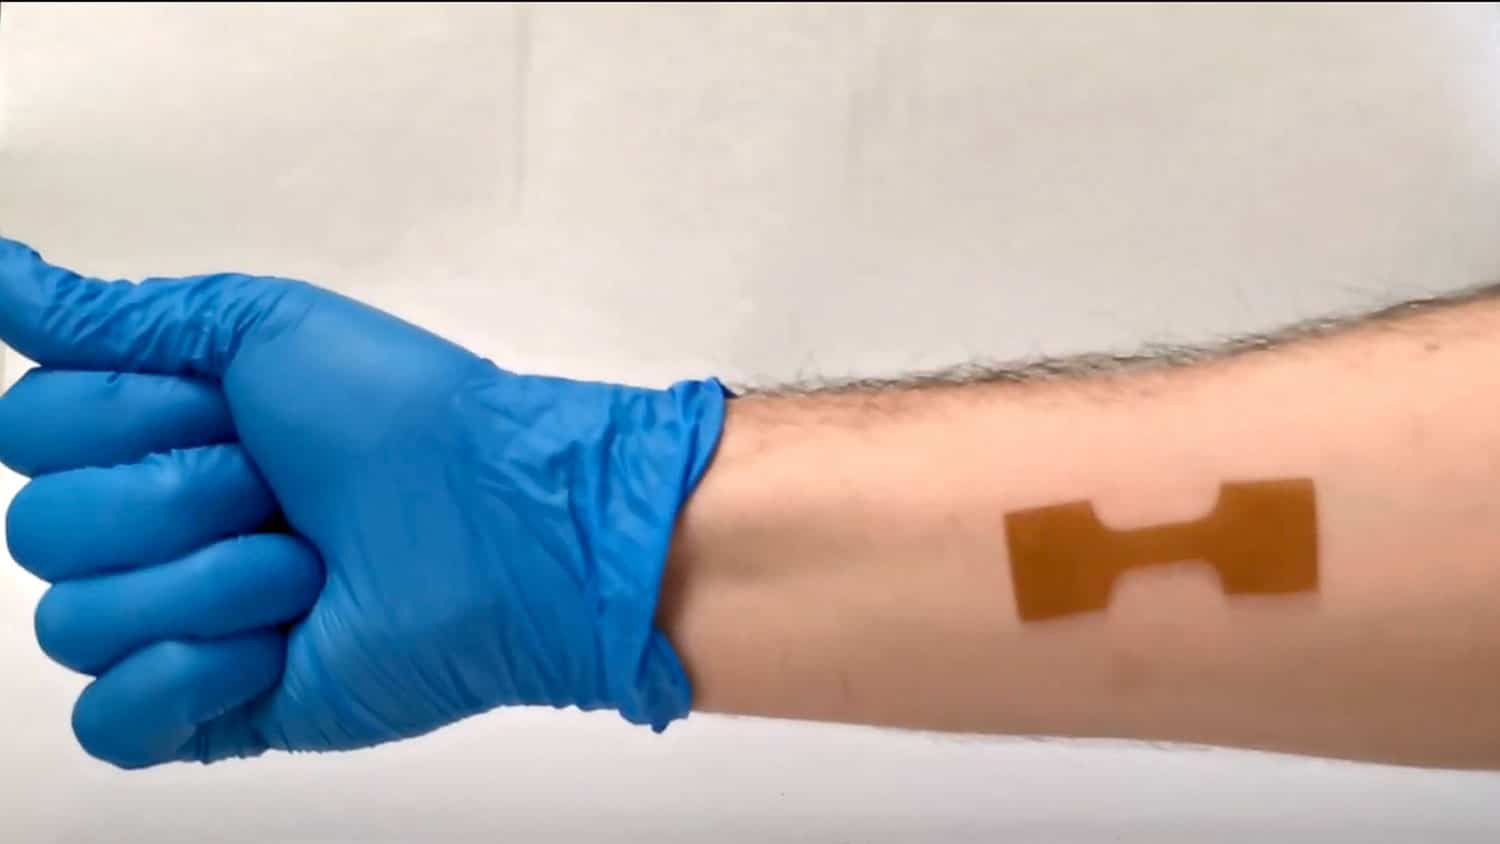 Researchers have developed intelligent hydrogel materials for use as a reusable wound dressing.